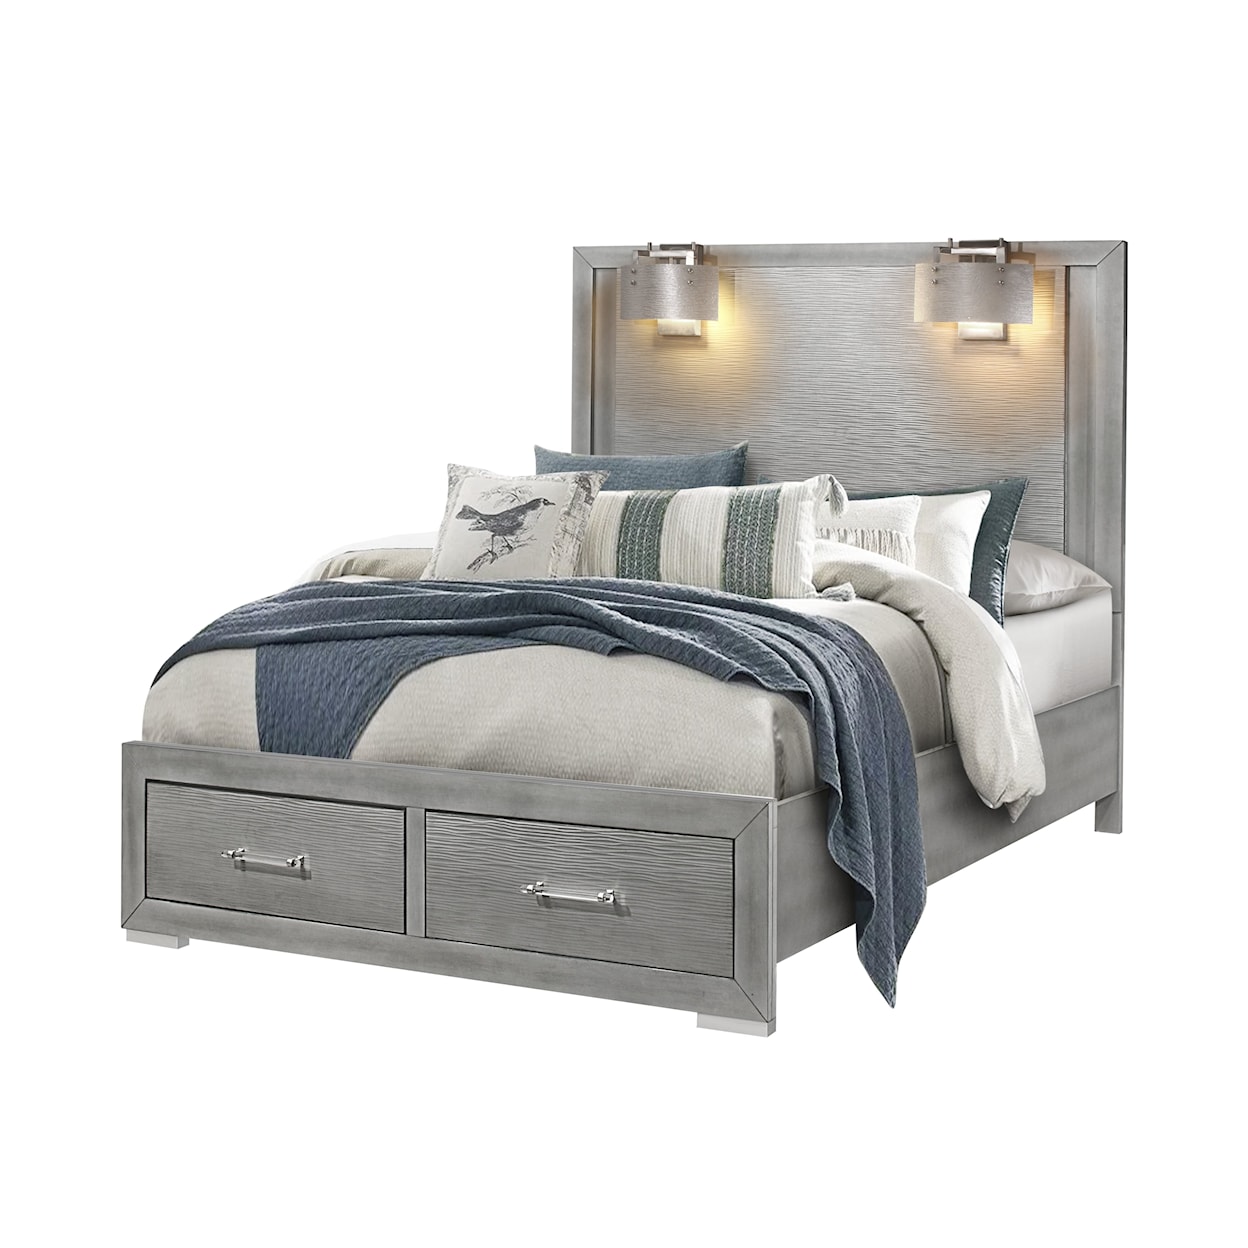 Global Furniture Tiffany Full Storage Bed with Built-In Lamps